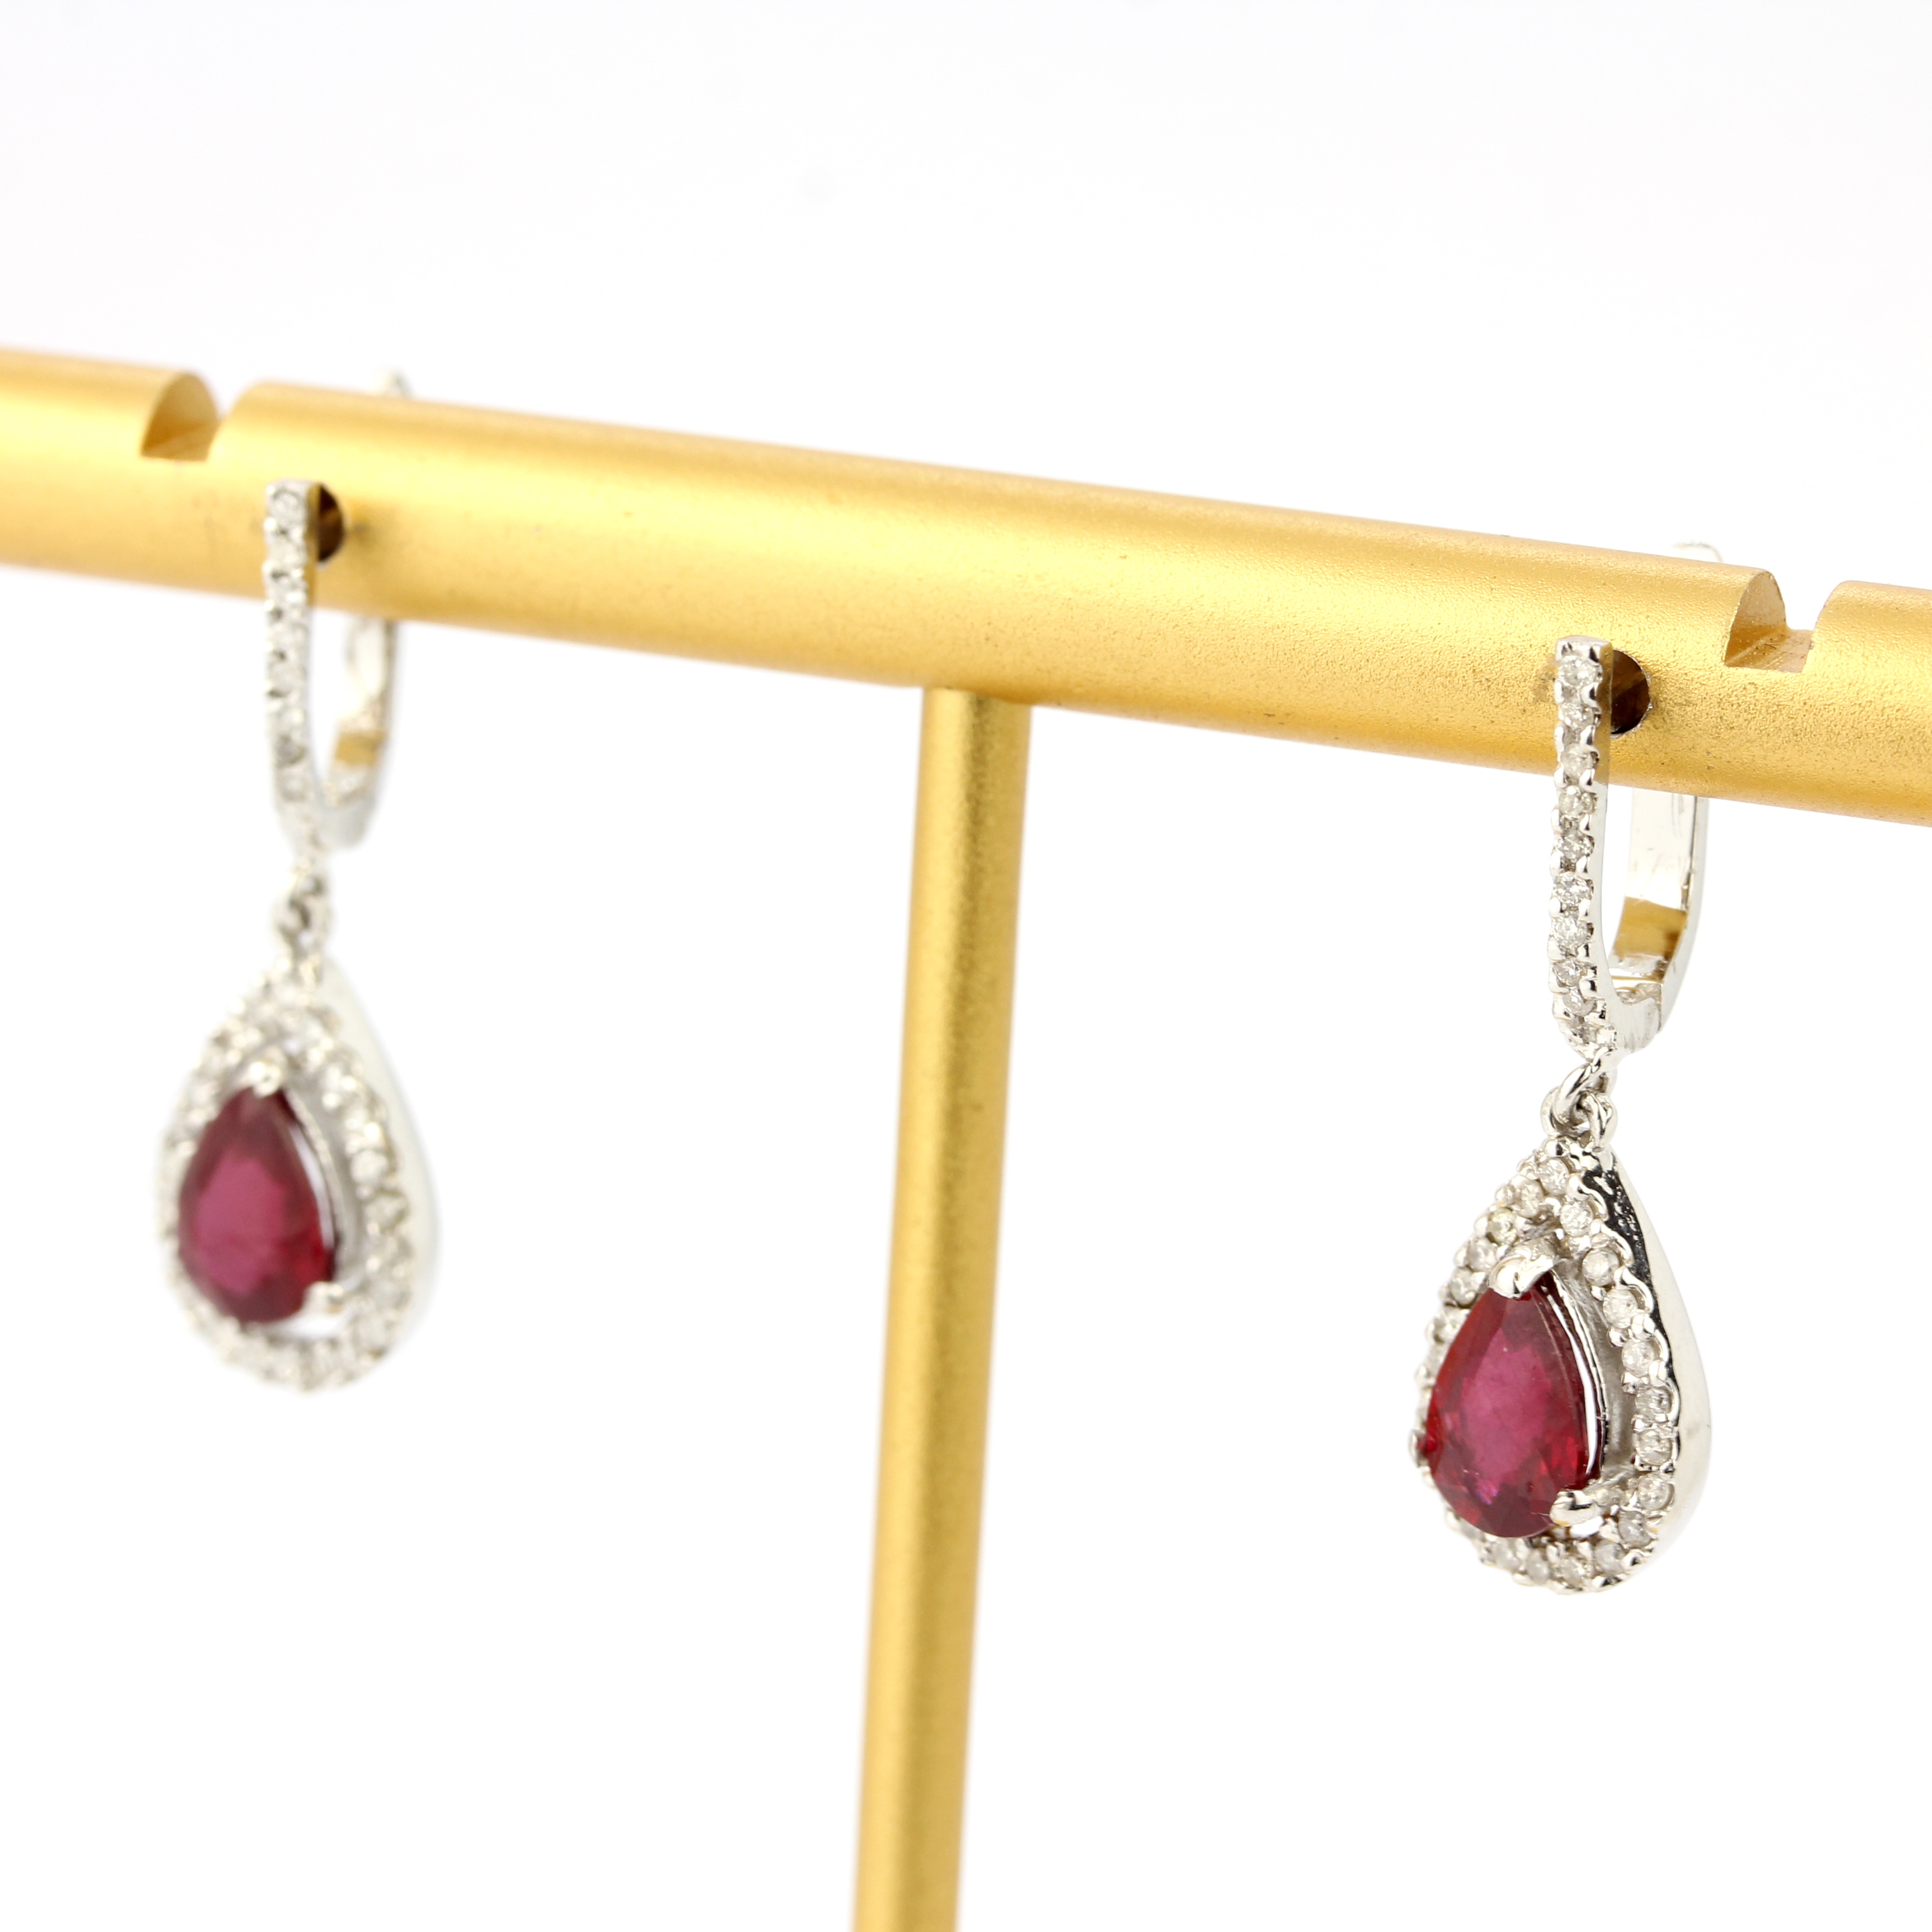 A pair of 18ct white gold drop earrings set with pear cut rubies and diamonds, L. 1.8cm. - Image 3 of 4